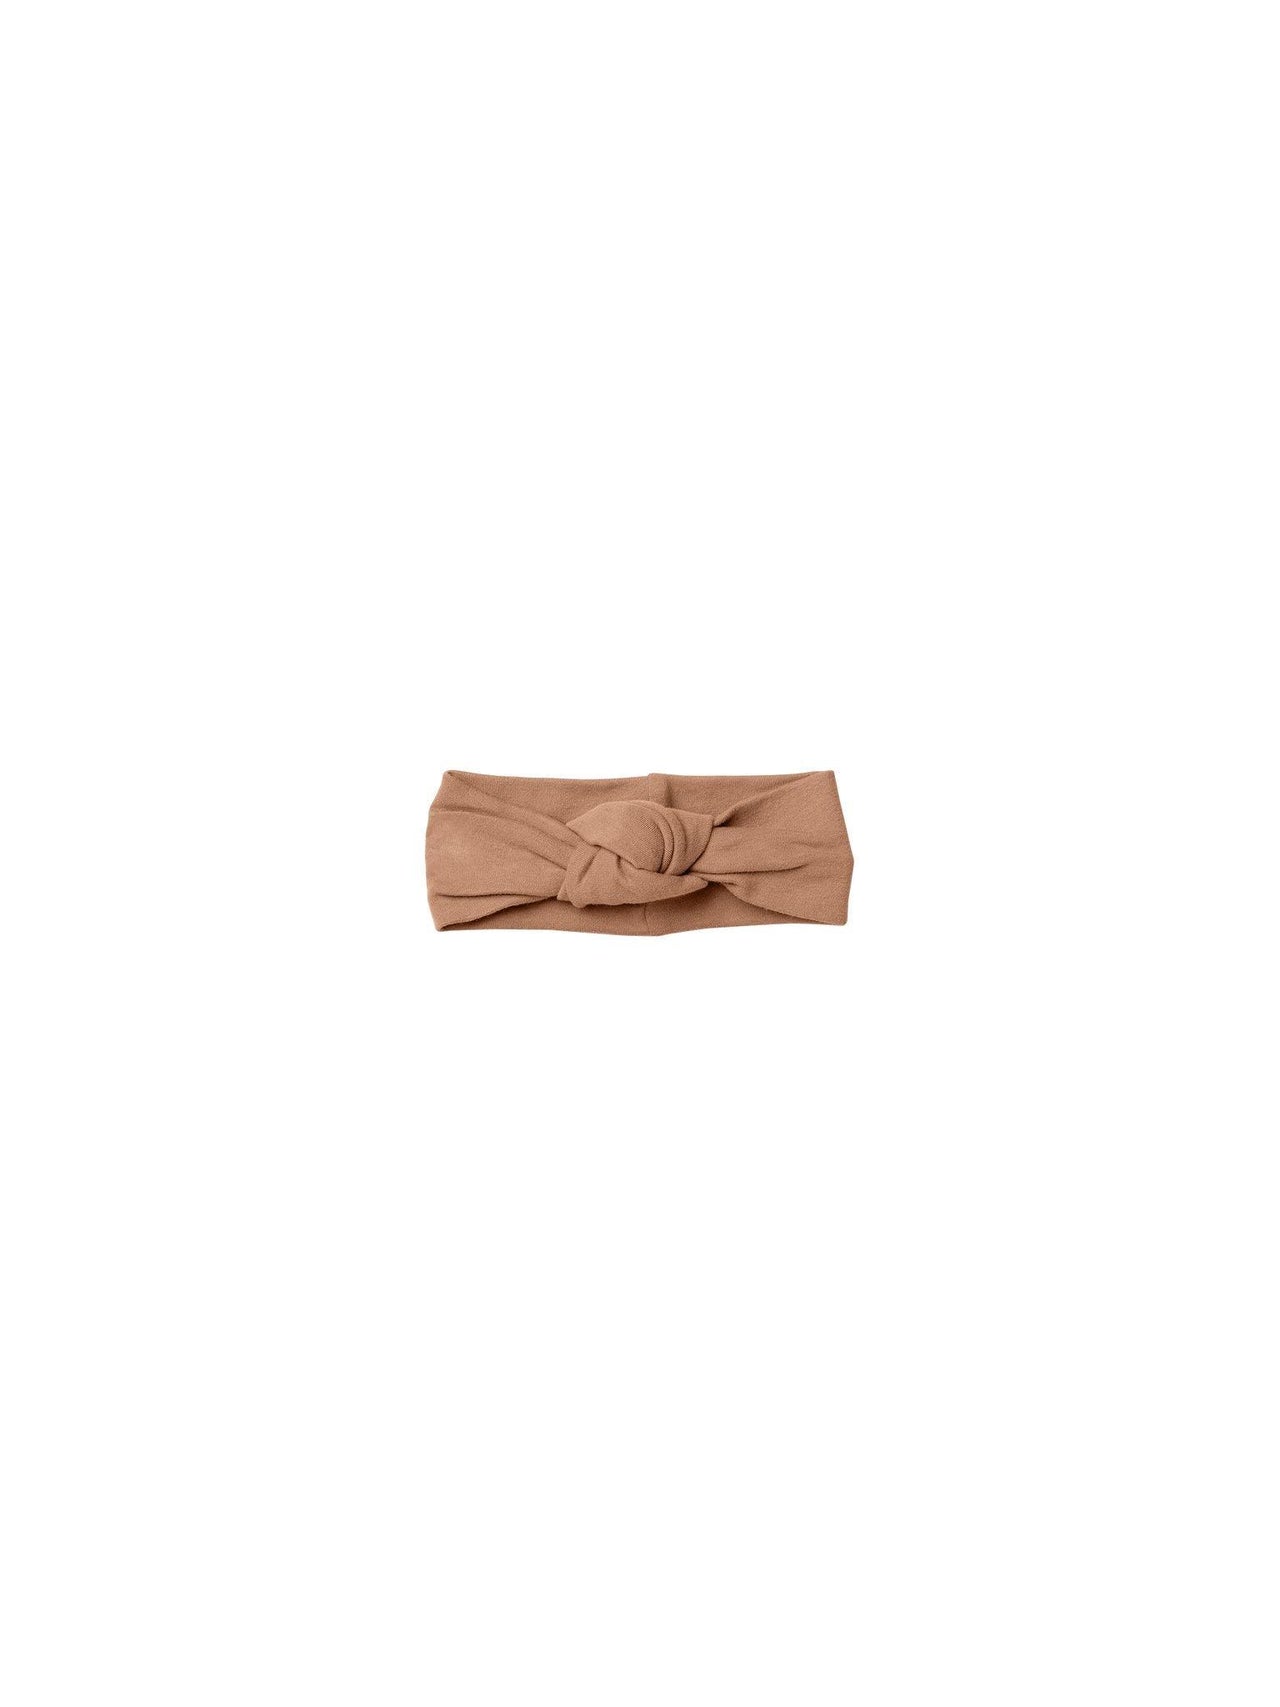 Quincy Mae Organic Knotted Headband, Clay